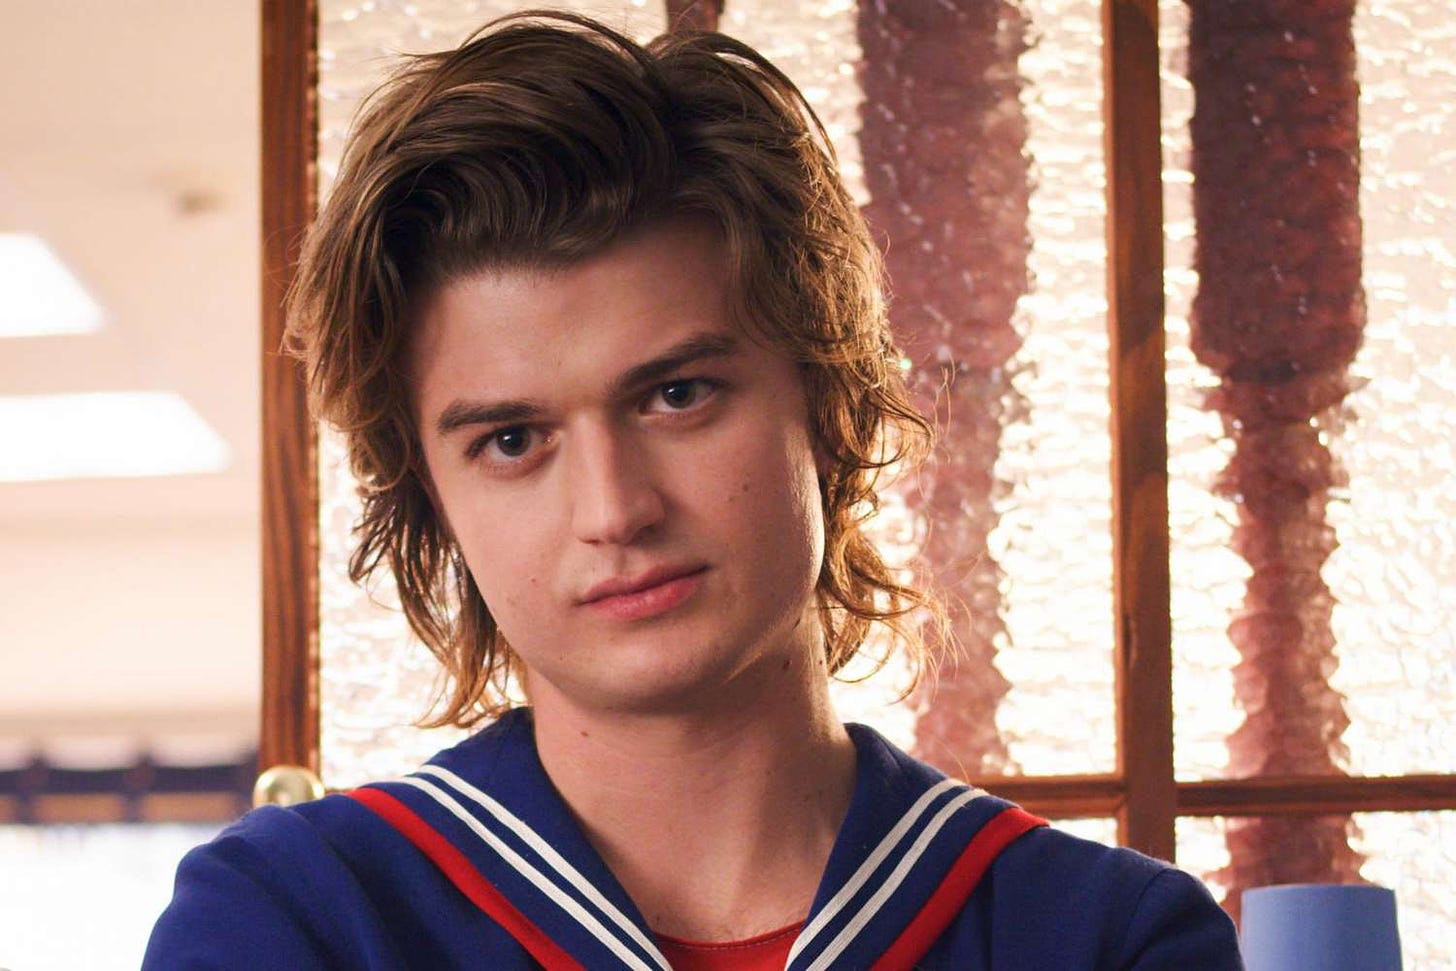 Joe Keery in the sailor outfit from Stranger Things